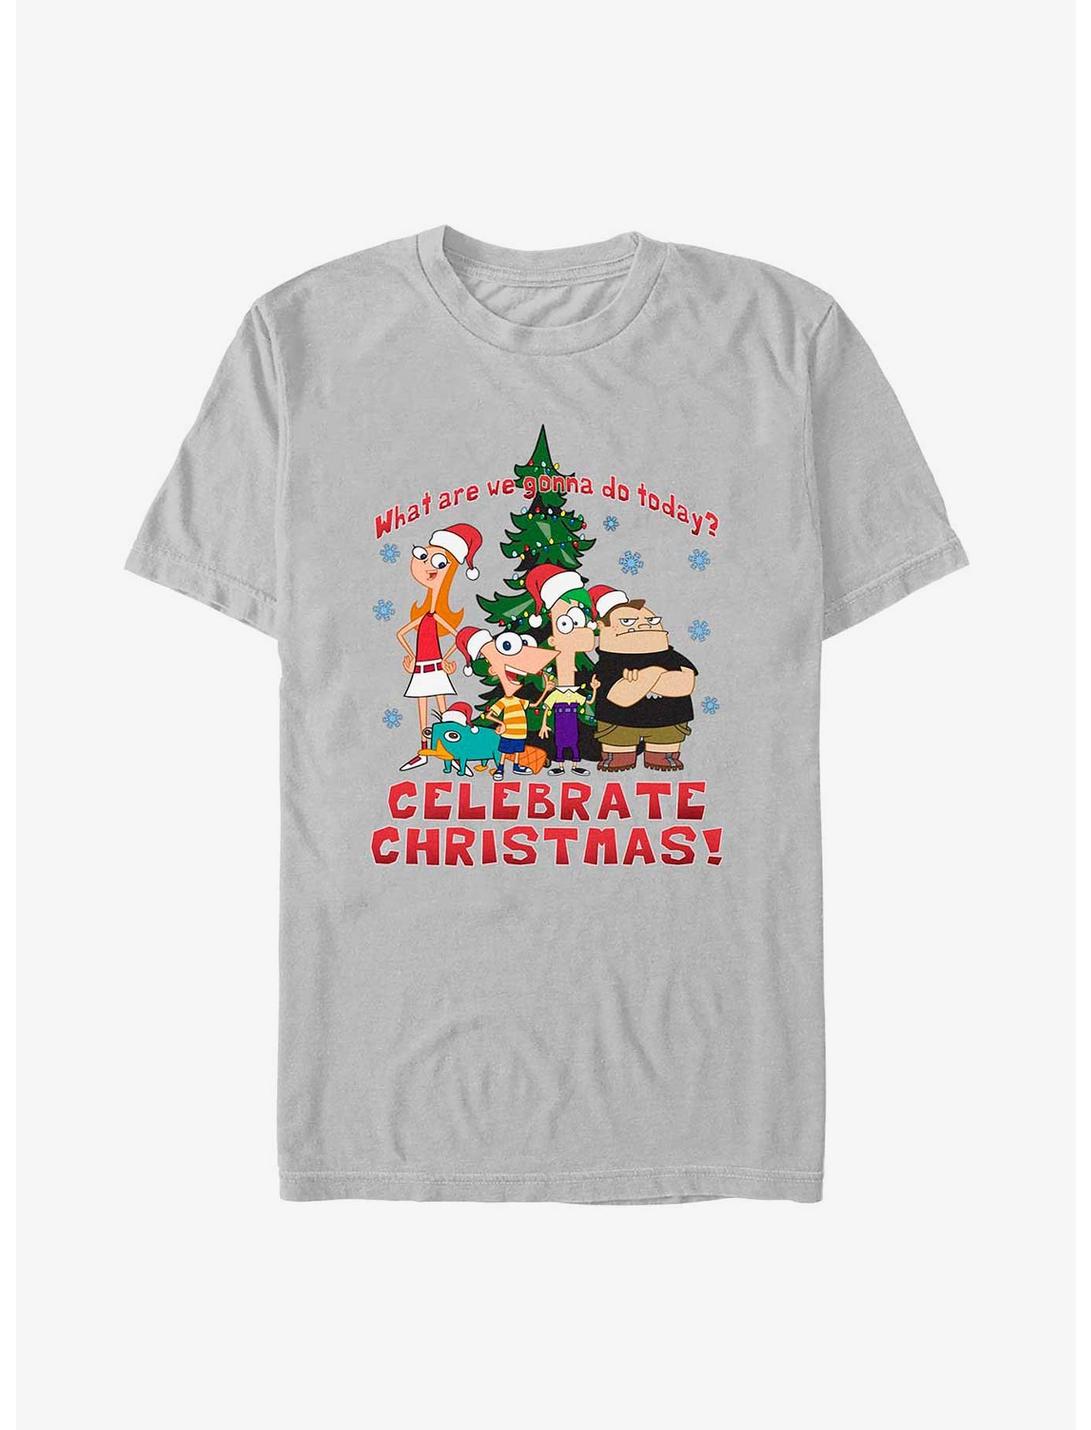 Disney Phineas And Ferb Christmas T-Shirt, SILVER, hi-res